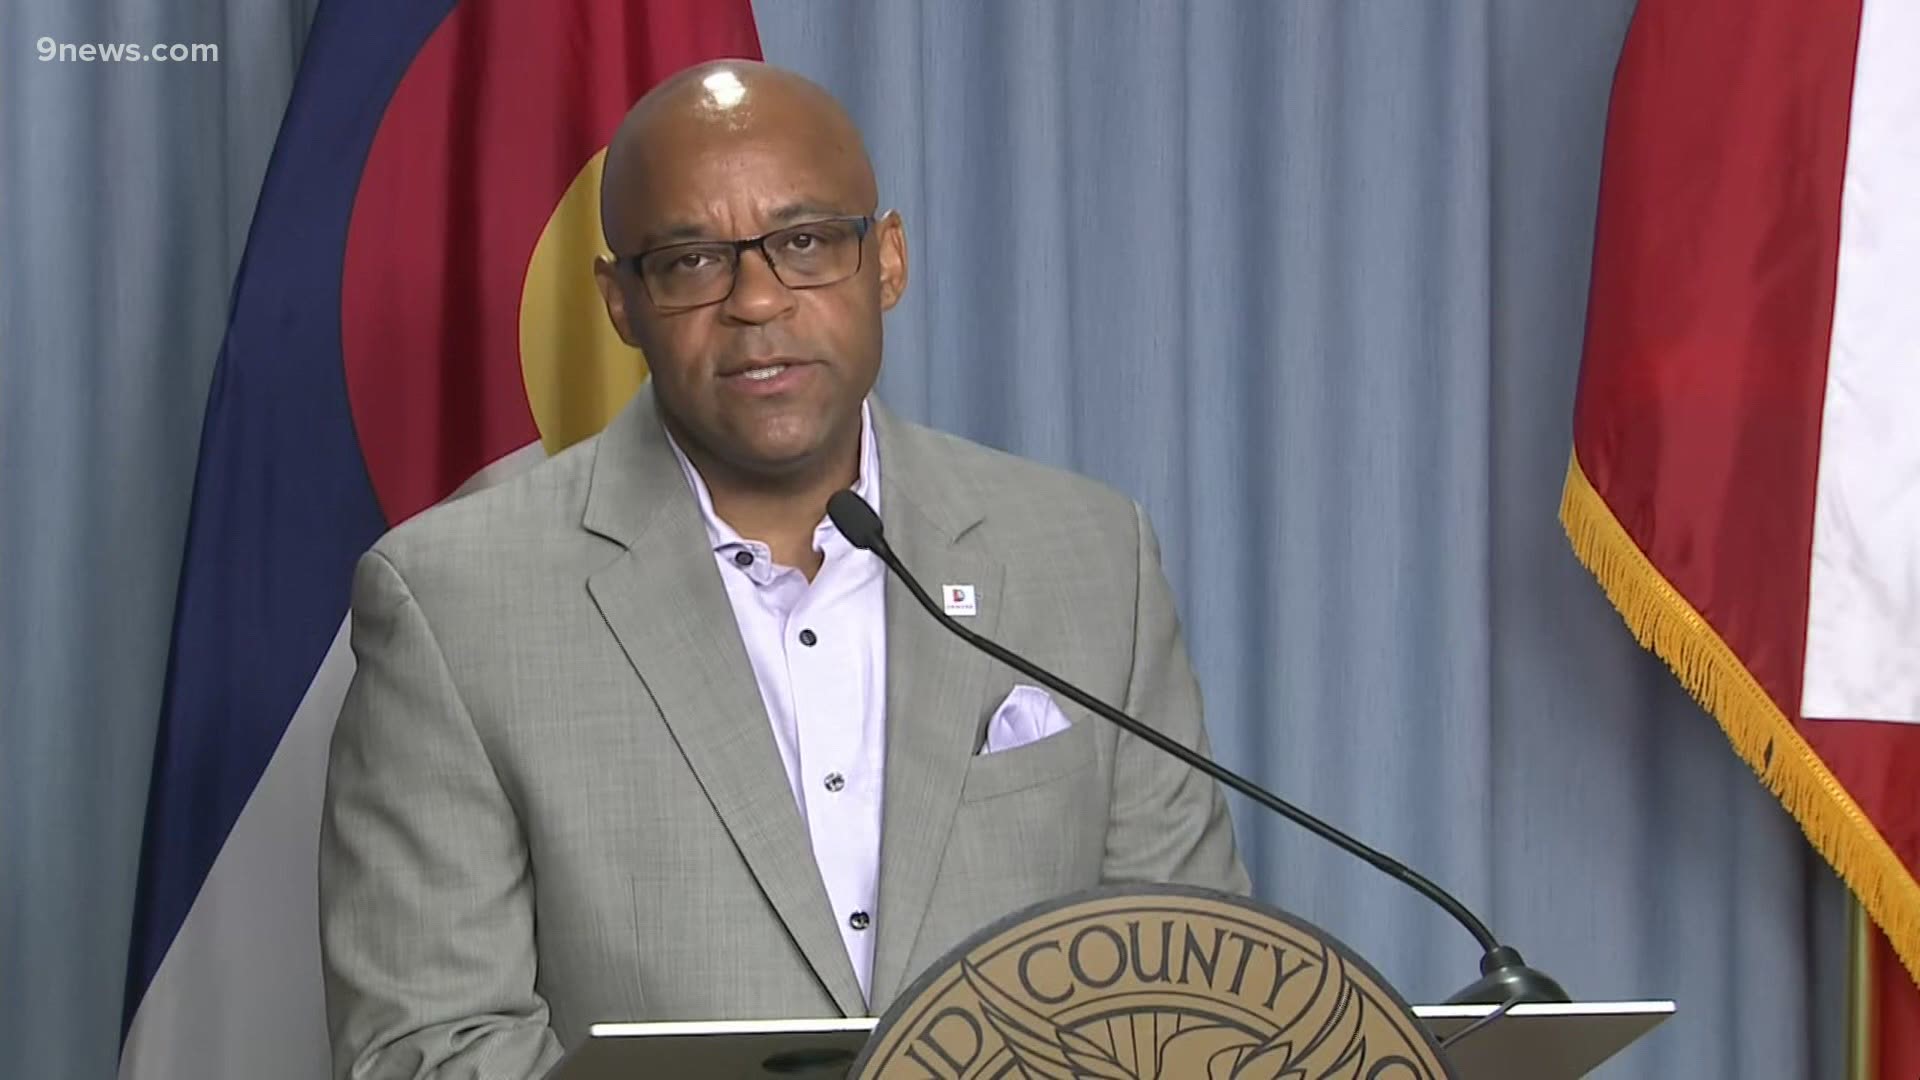 Denver Mayor Michael Hancock said he would pause variance requests and increase compliance for mask complaints in the city.